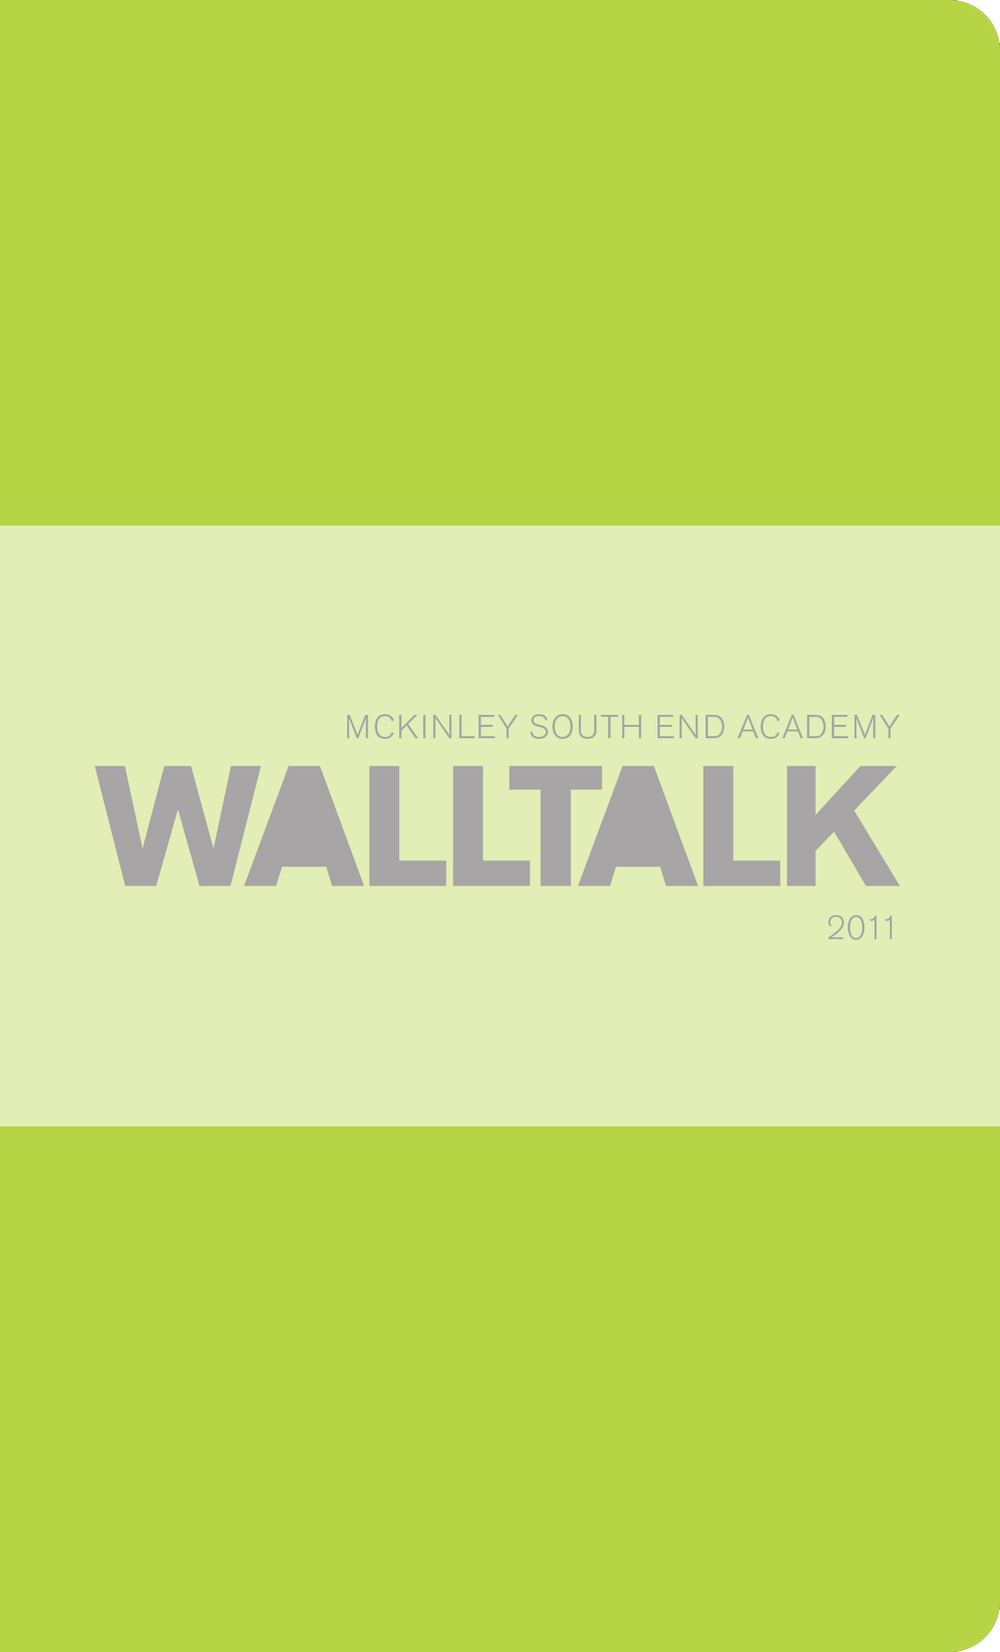 wall-talk-green-cover.png